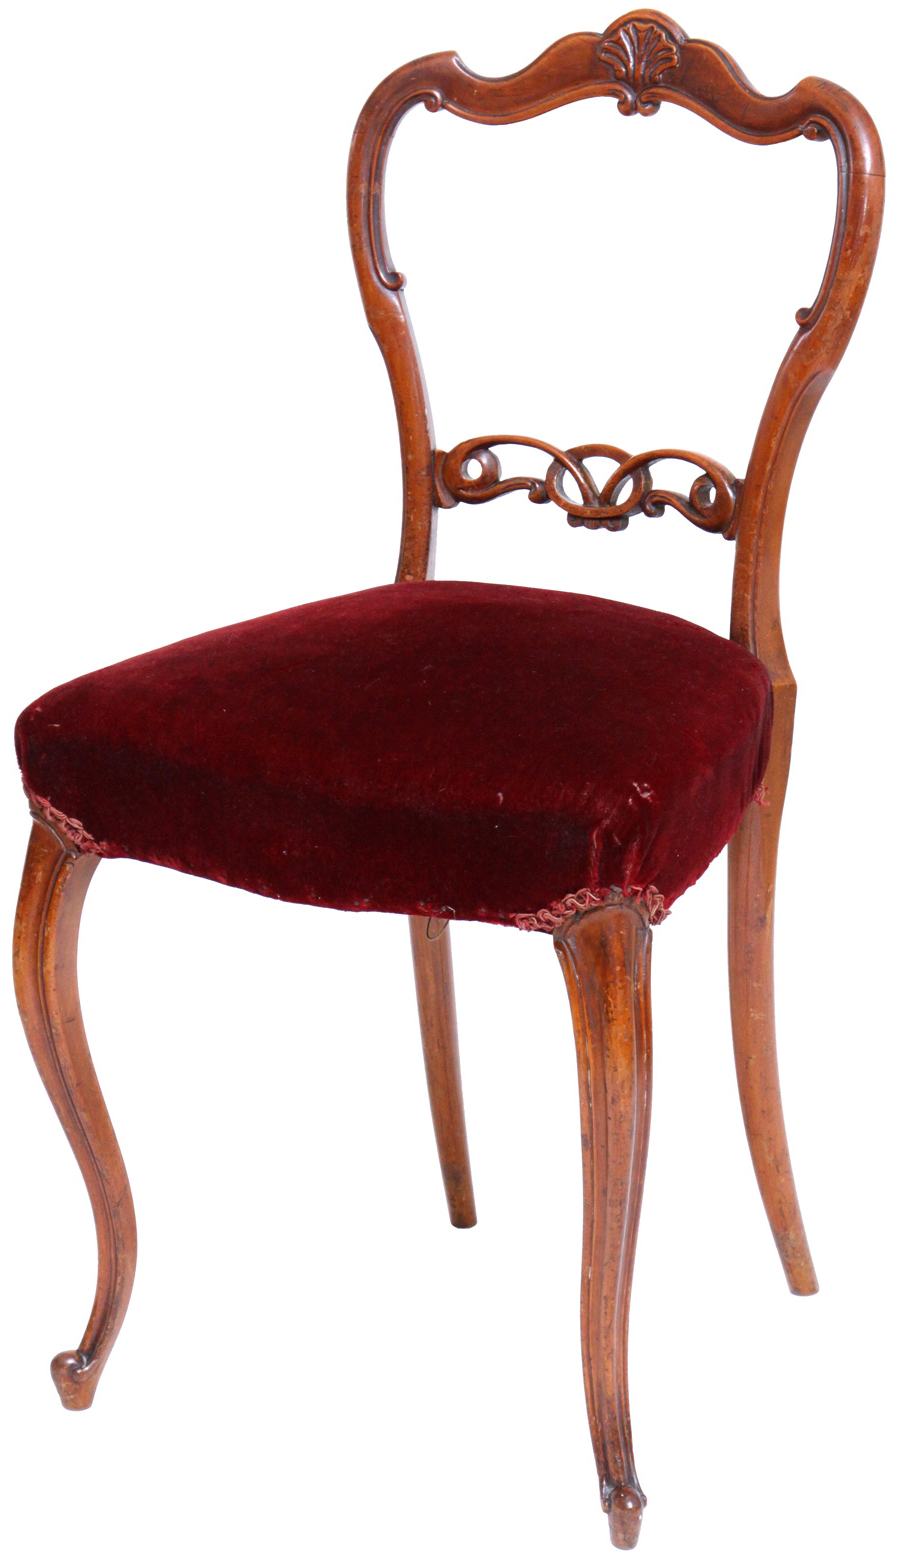 Genuine Antique Victorian Balloon Back Chair - Rosewood and Stuff-Over Seat - כיסא אנגלי ויקטוריאני מקורי - Back To List of Antique English Furniture